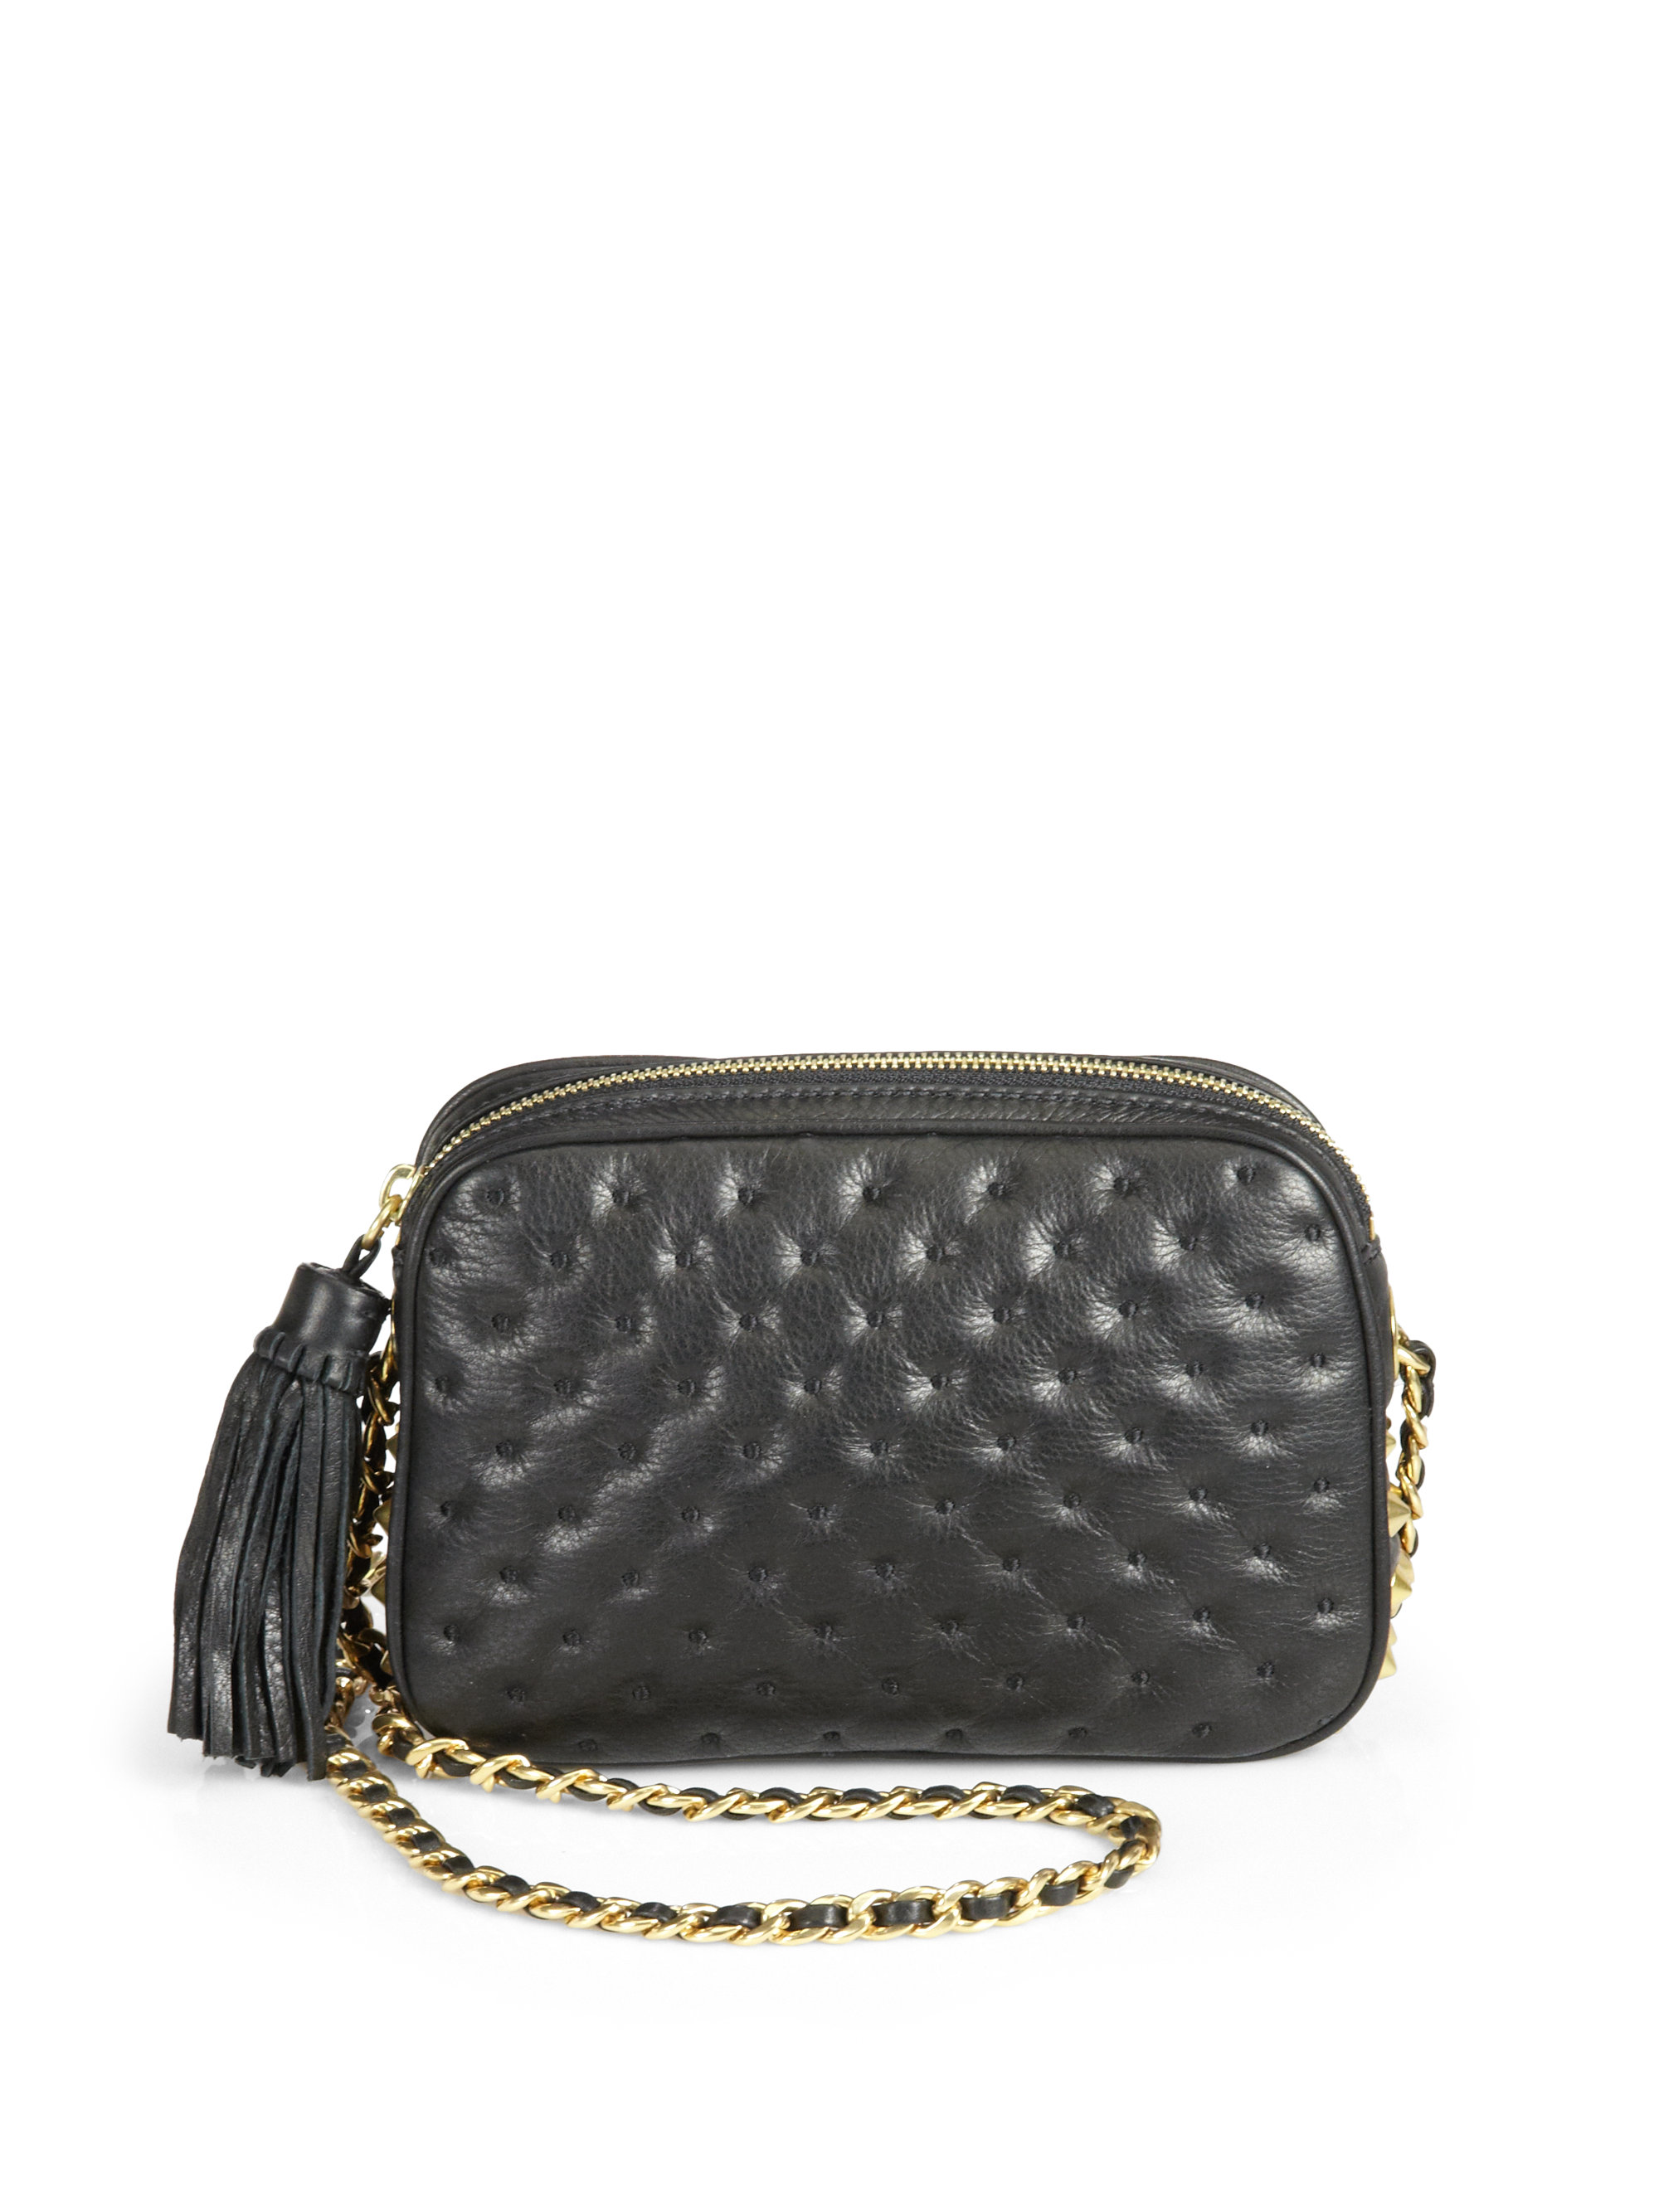 Rebecca Minkoff Flirty Quilted Leather Crossbody Bag in Black | Lyst